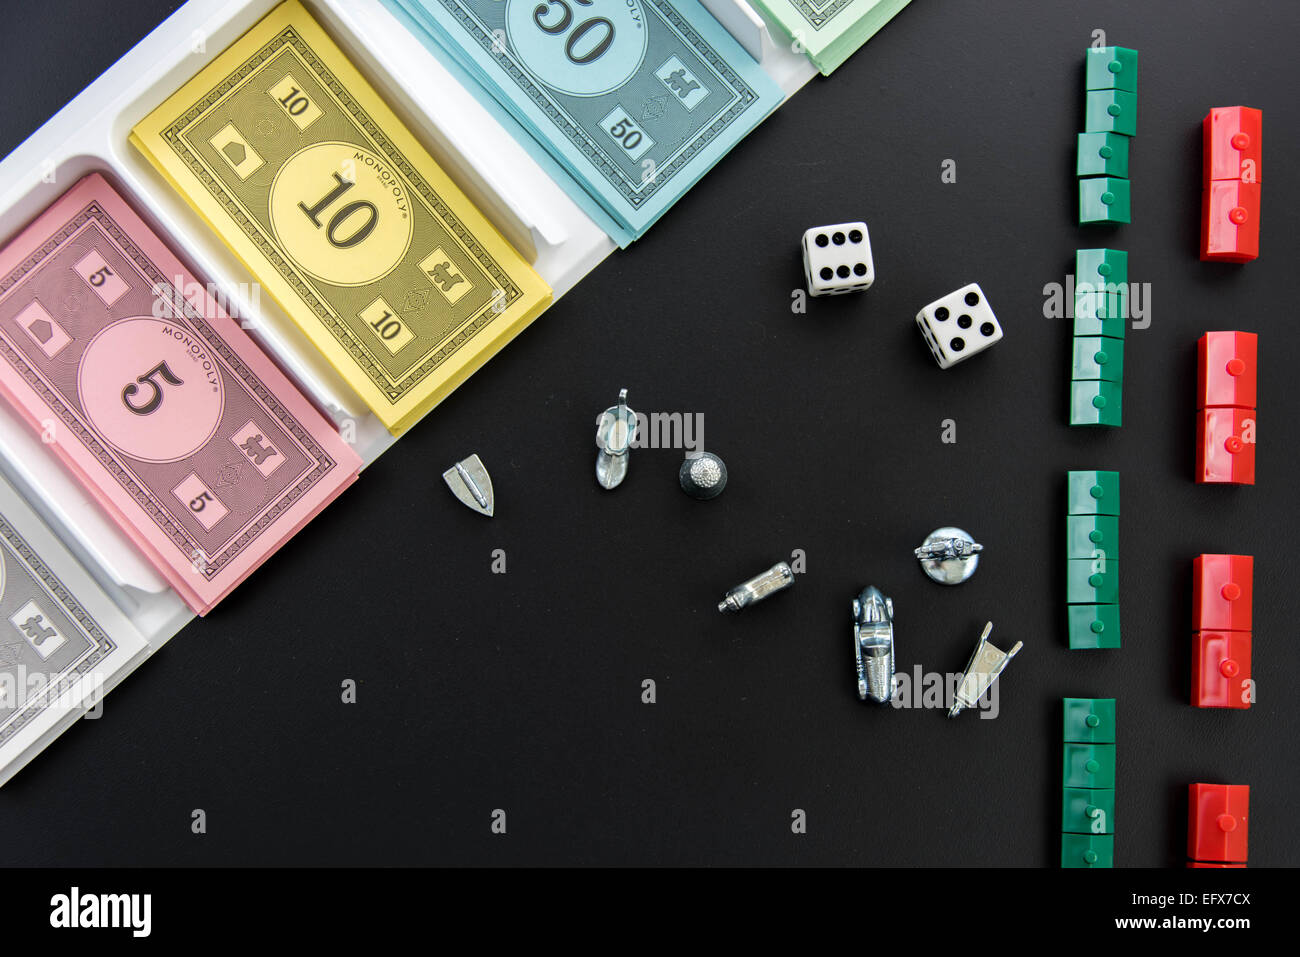 February 8, 2015 - Houston, TX, USA.  Monopoly money, playing pieces and dice Stock Photo